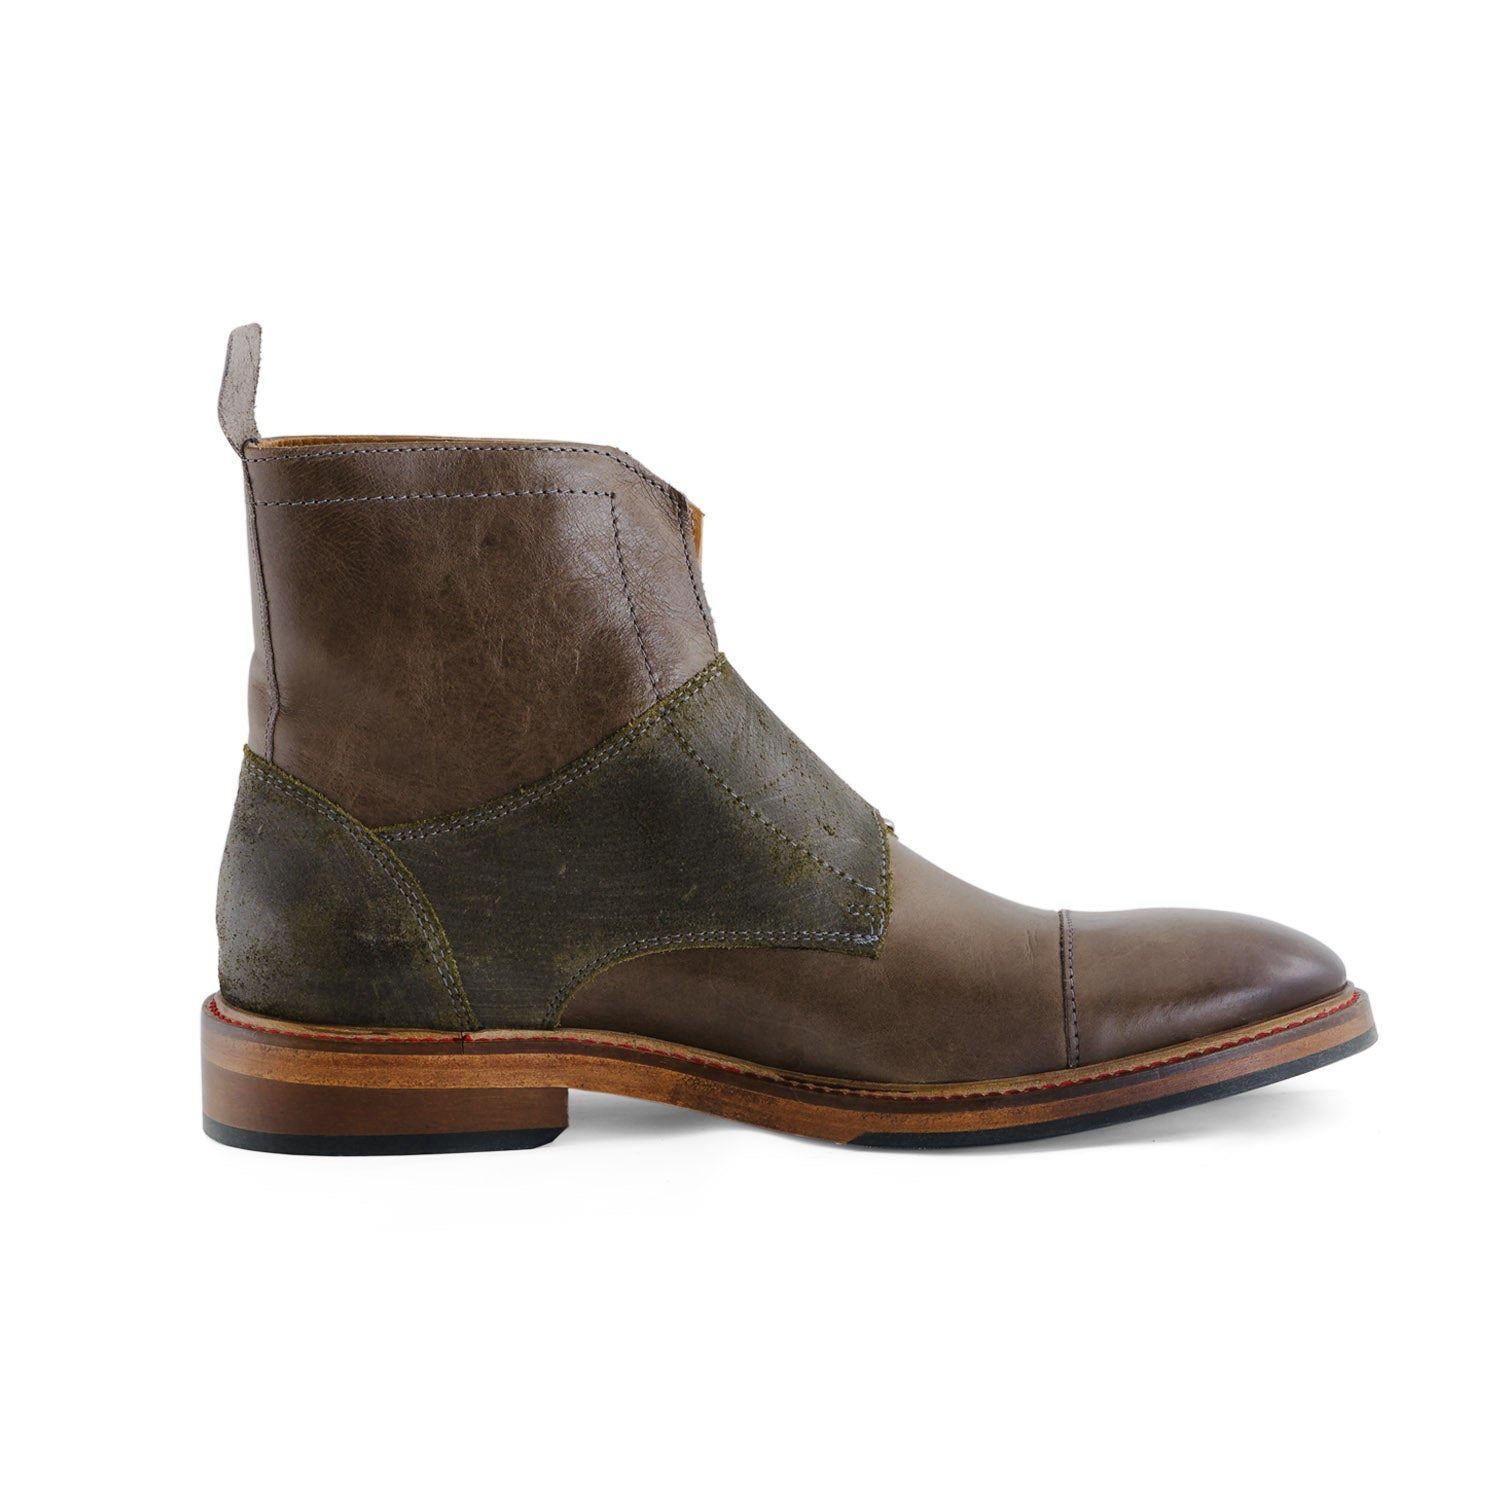 The Limited-Edition Monk Boot (5 color options) - NiK Kacy